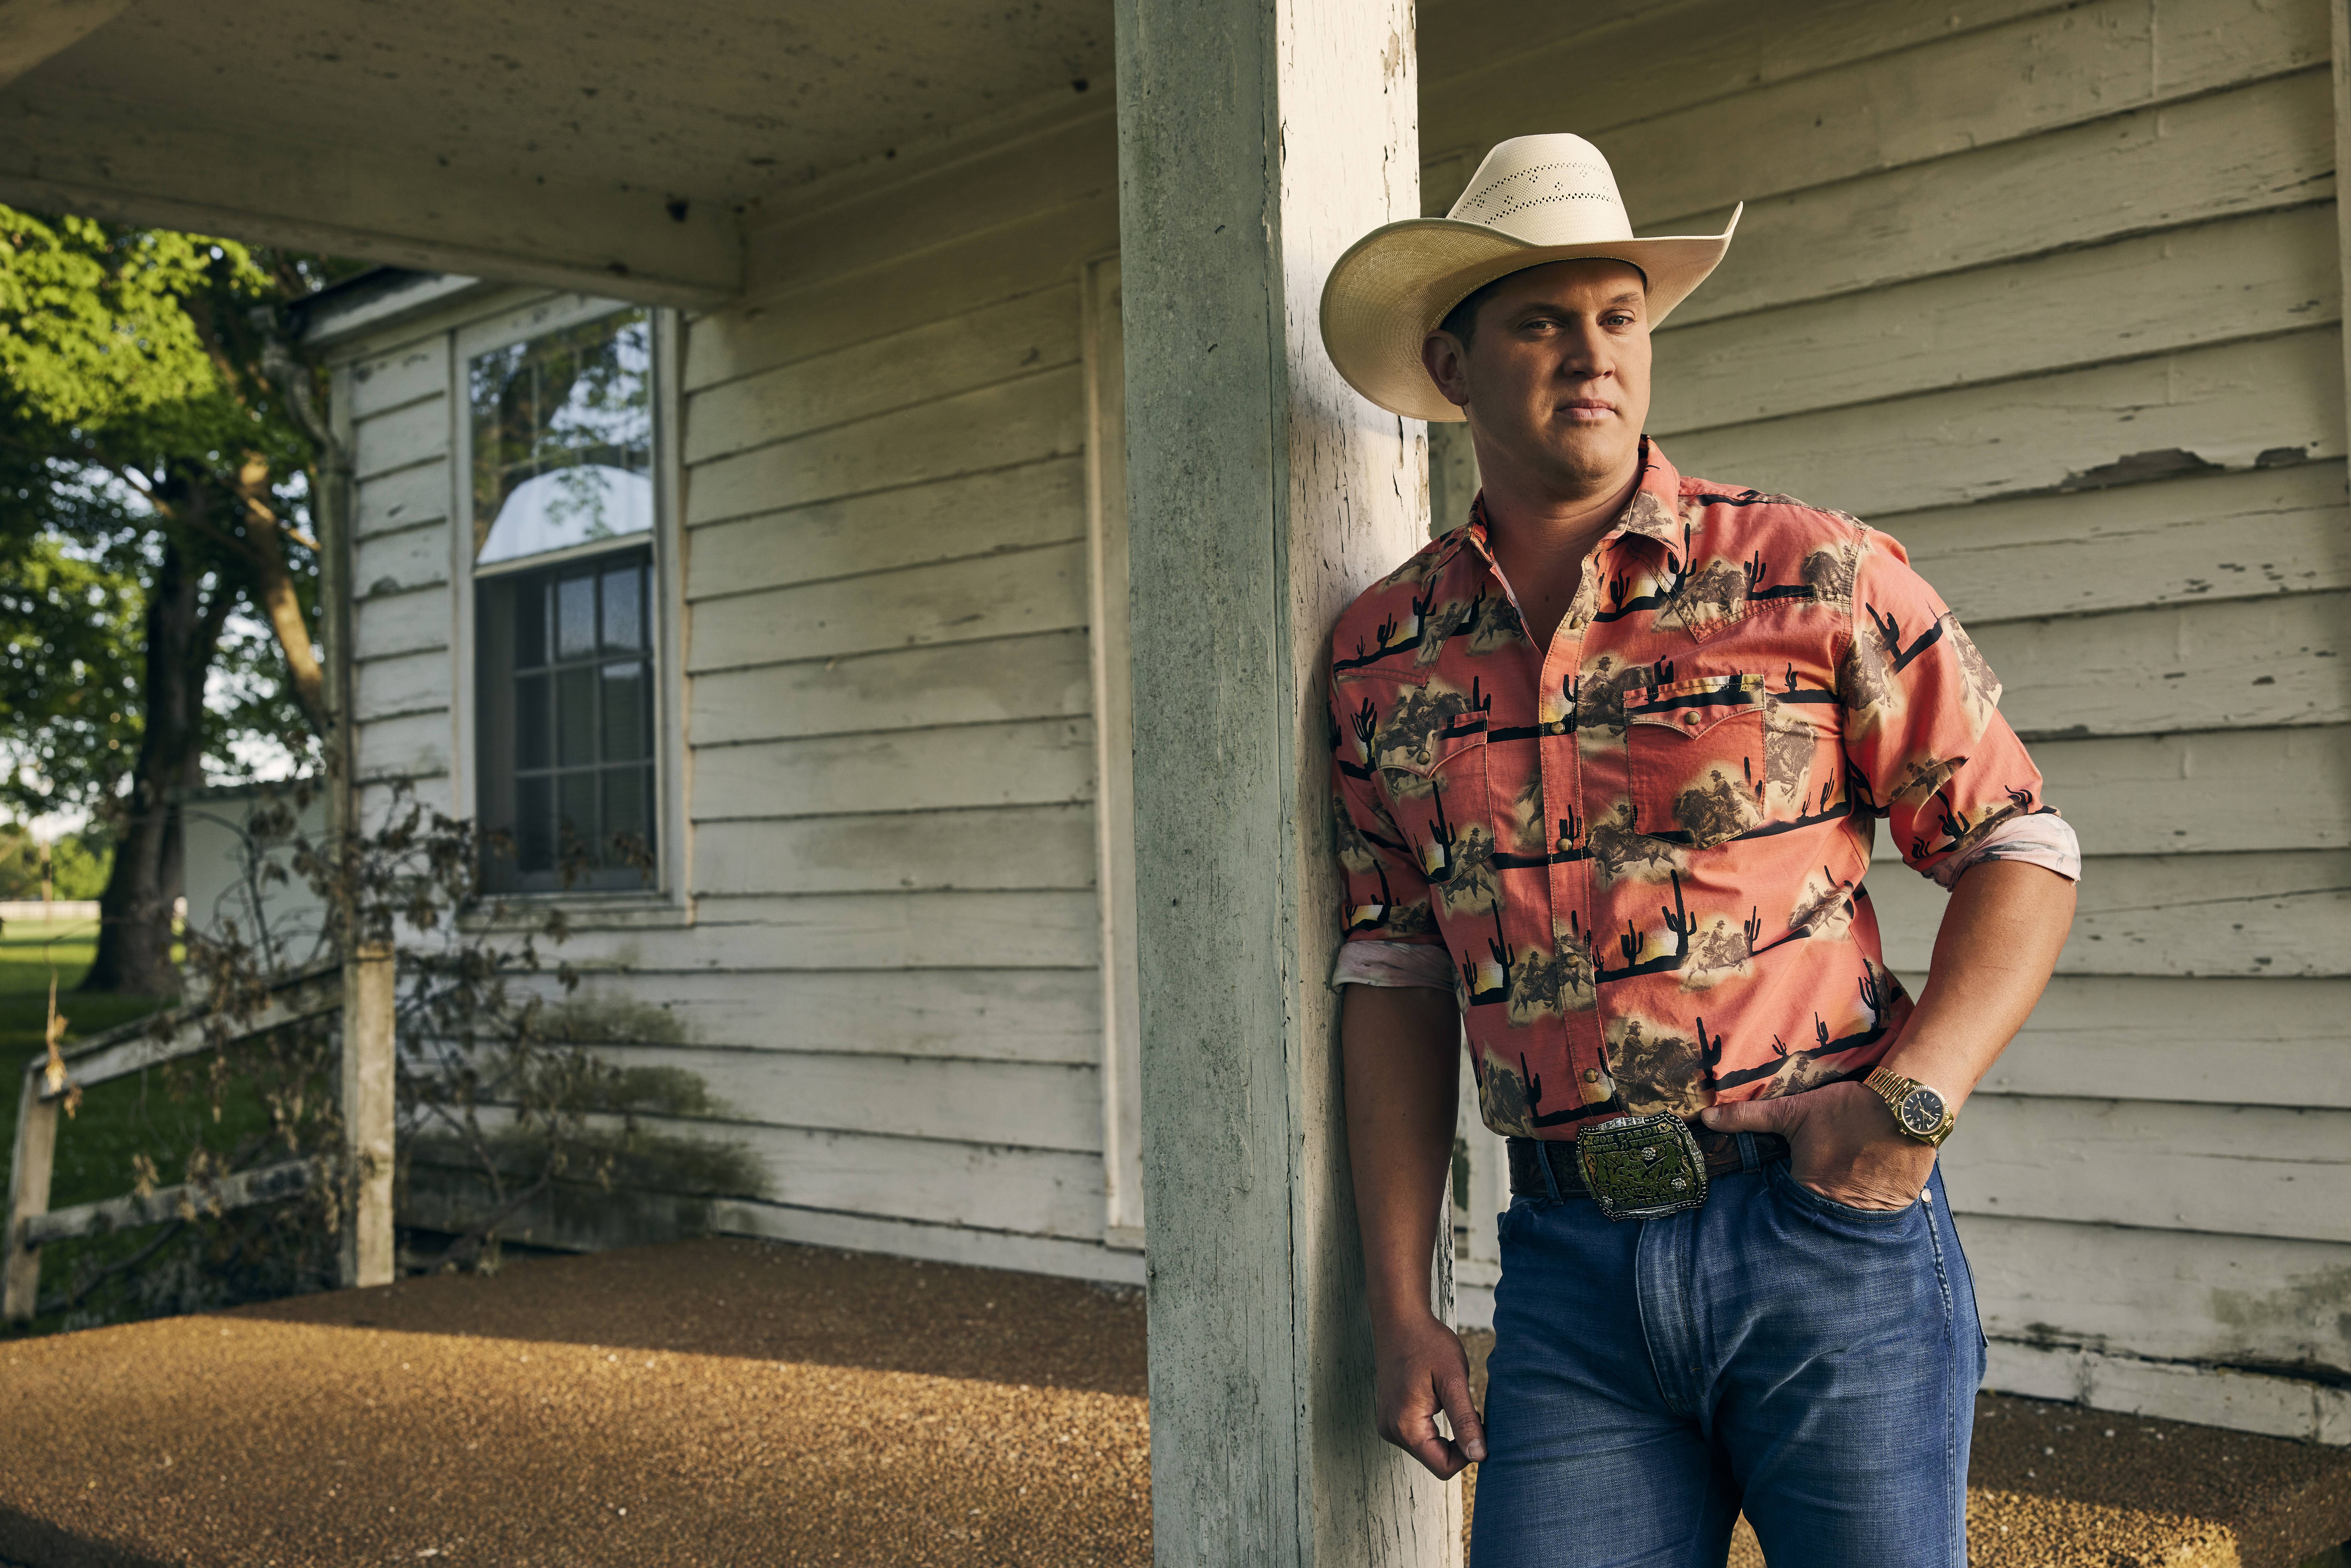 The Working Man's Love Song, Night Shift by Jon Pardi